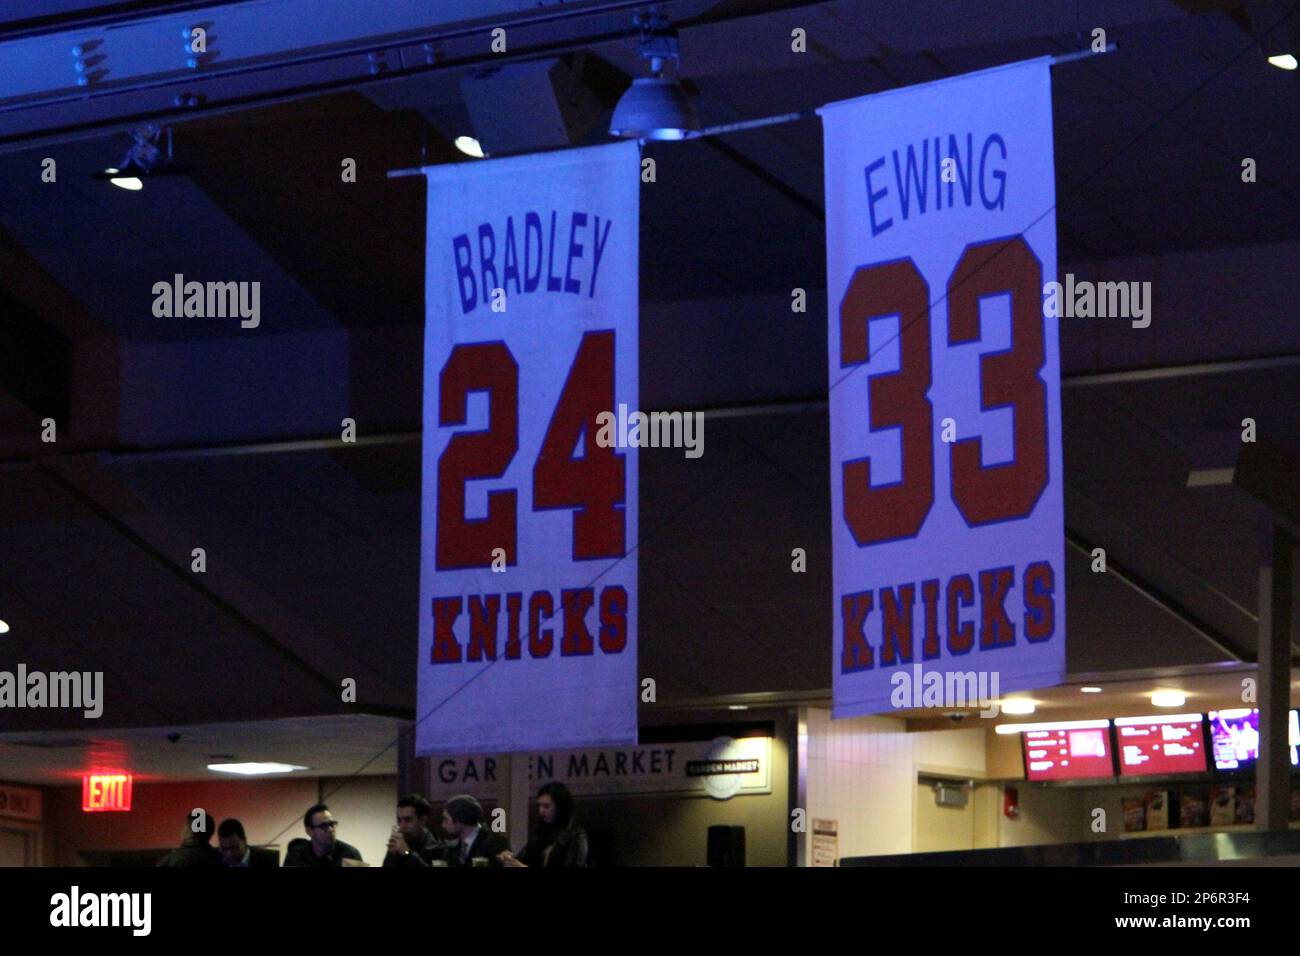 The retired jersey of New York Knicks player Dave DeBusschere #22